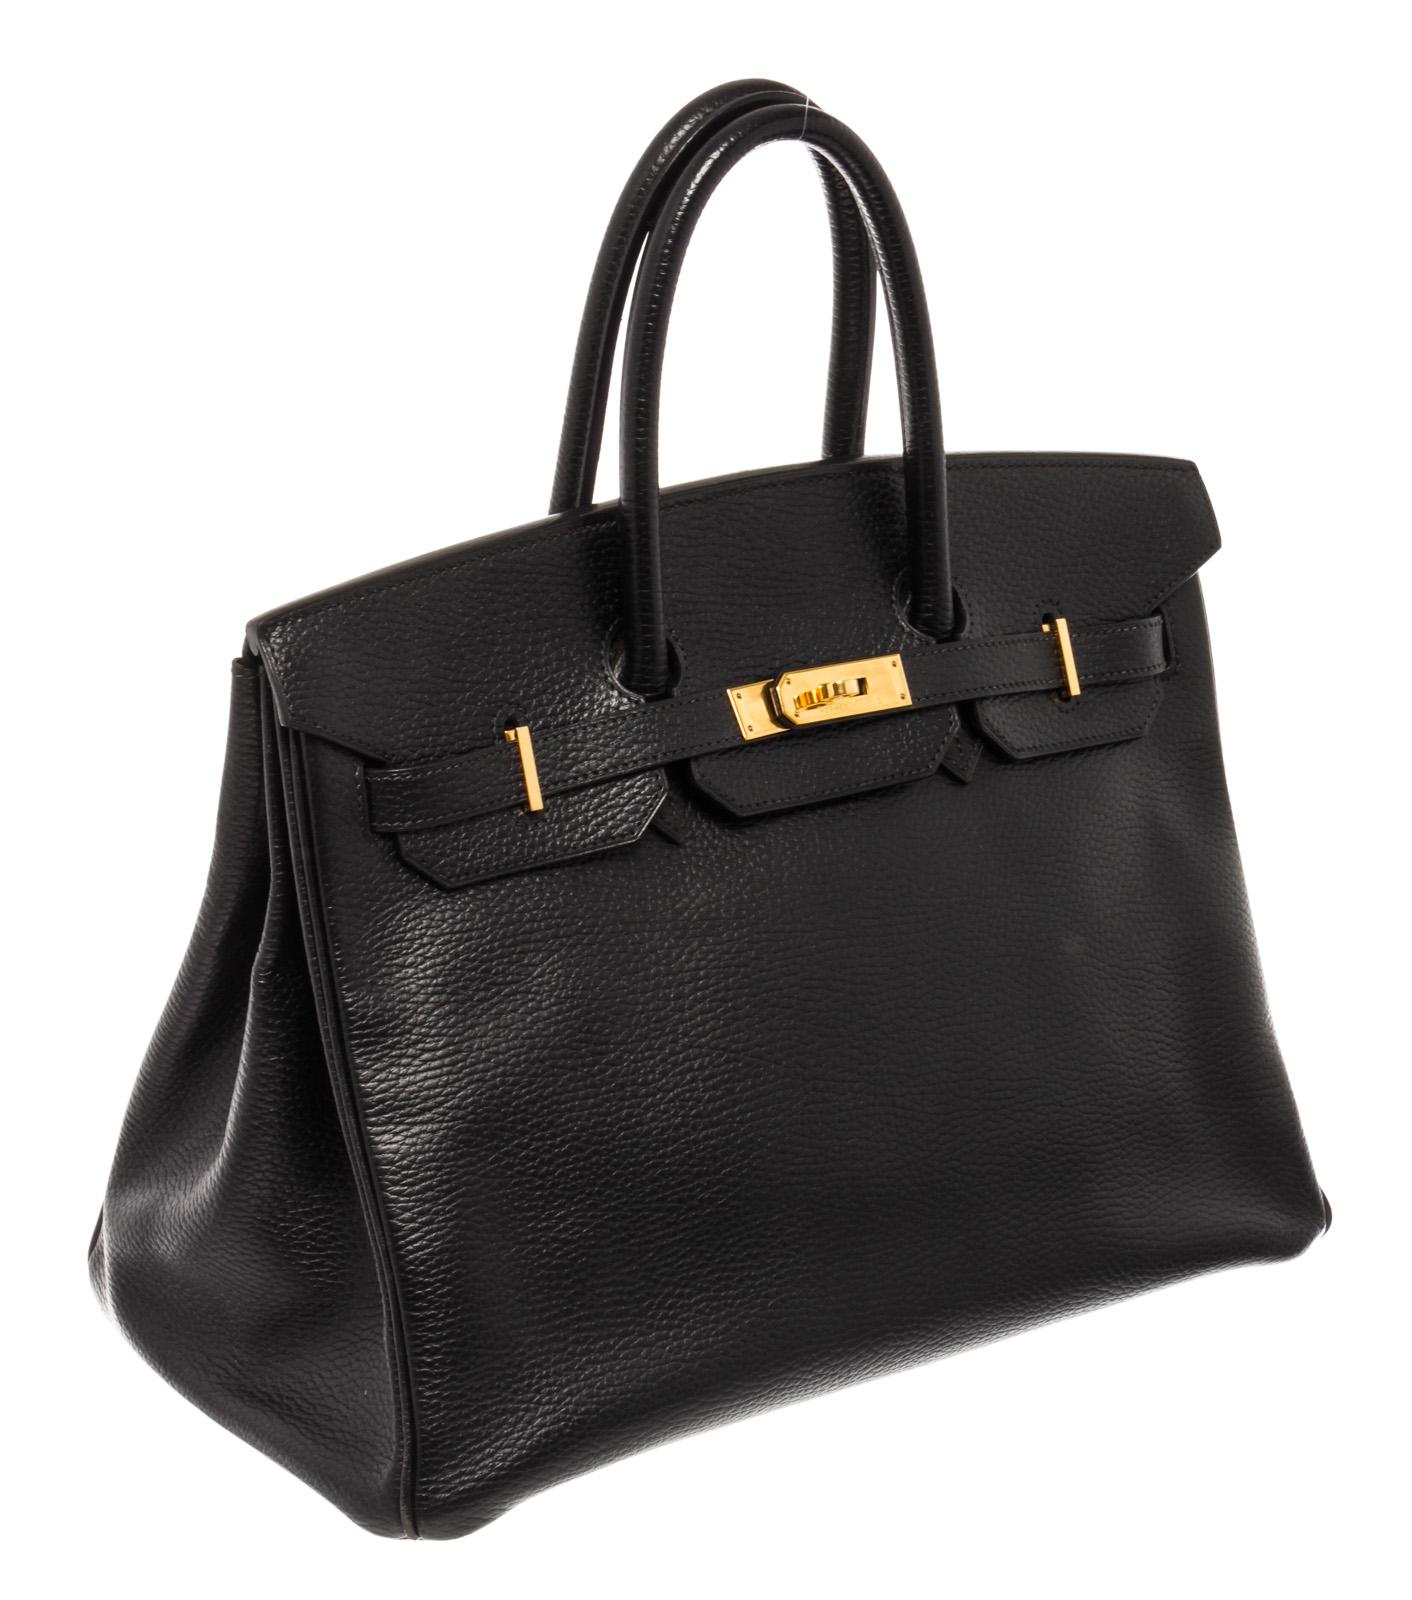 This classic Hermes Birkin 35 cm handbag is done in black Ardennes leather. It features gold-tone hardware, dual rolled top handles and a black Chevre leather-lined interior. The interior has one large compartment, one slide pocket, and one zip